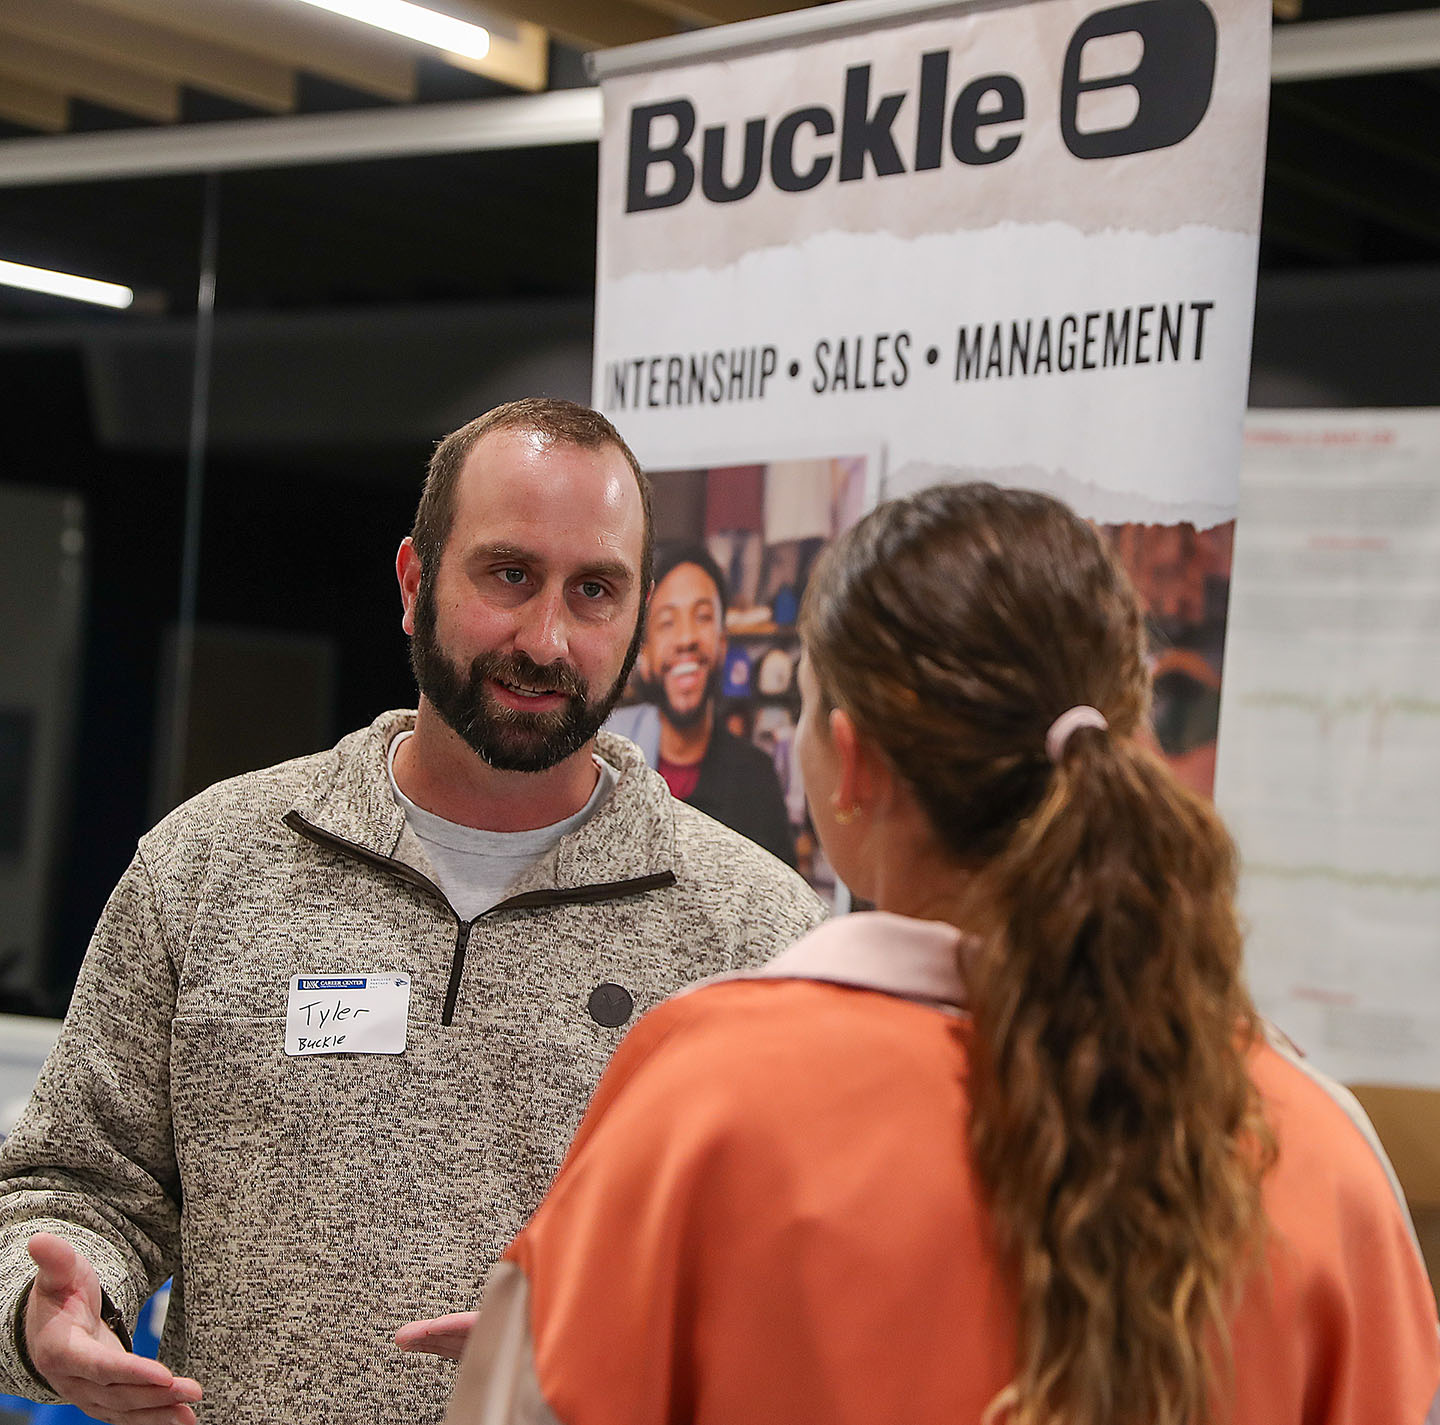 Employer Partners such as The Buckle are able to connect with UNK students during events organized by the College of Business and Technology Career Center.